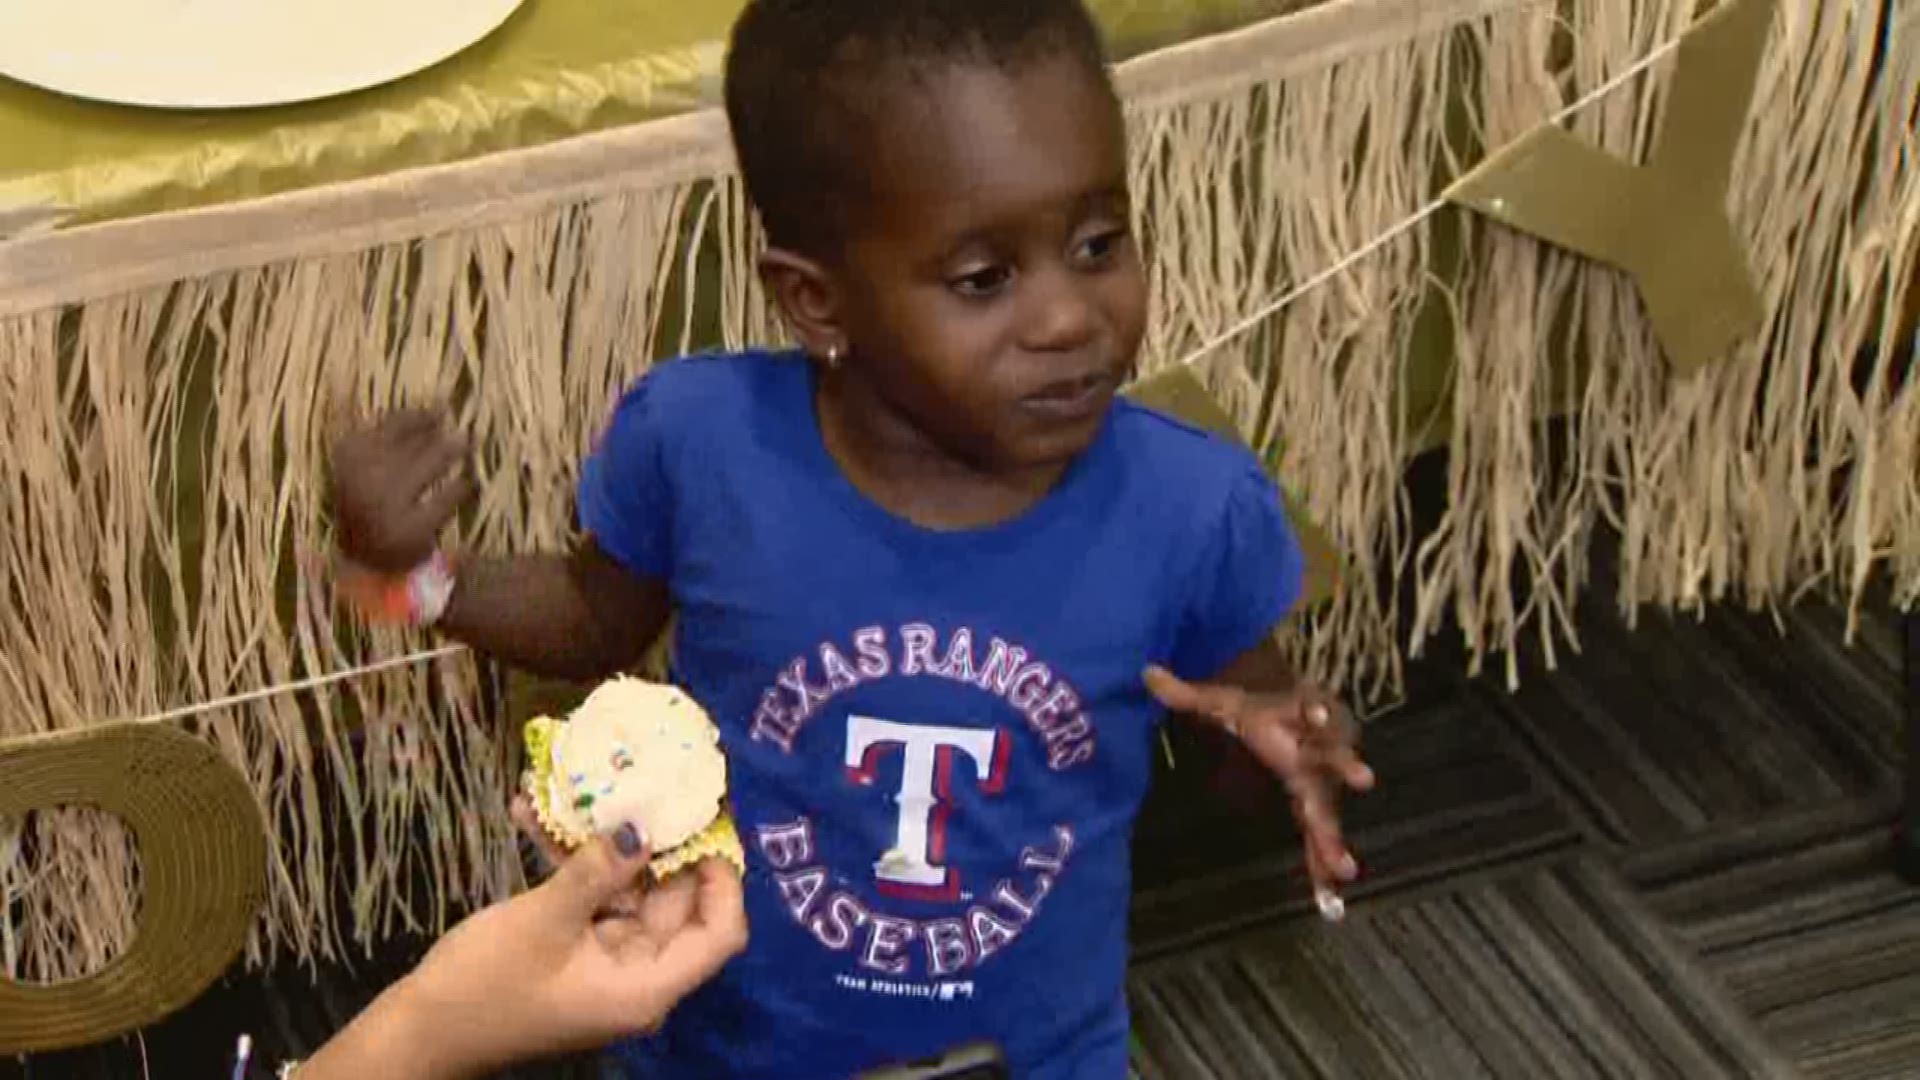 A 3-year old from Uganda has been in San Antonio for a few weeks to have open heart surgery. She's been doing well and will soon return home. Eyewitness News photojournalist Jason Eggleston was there for her going-away/birthday party.